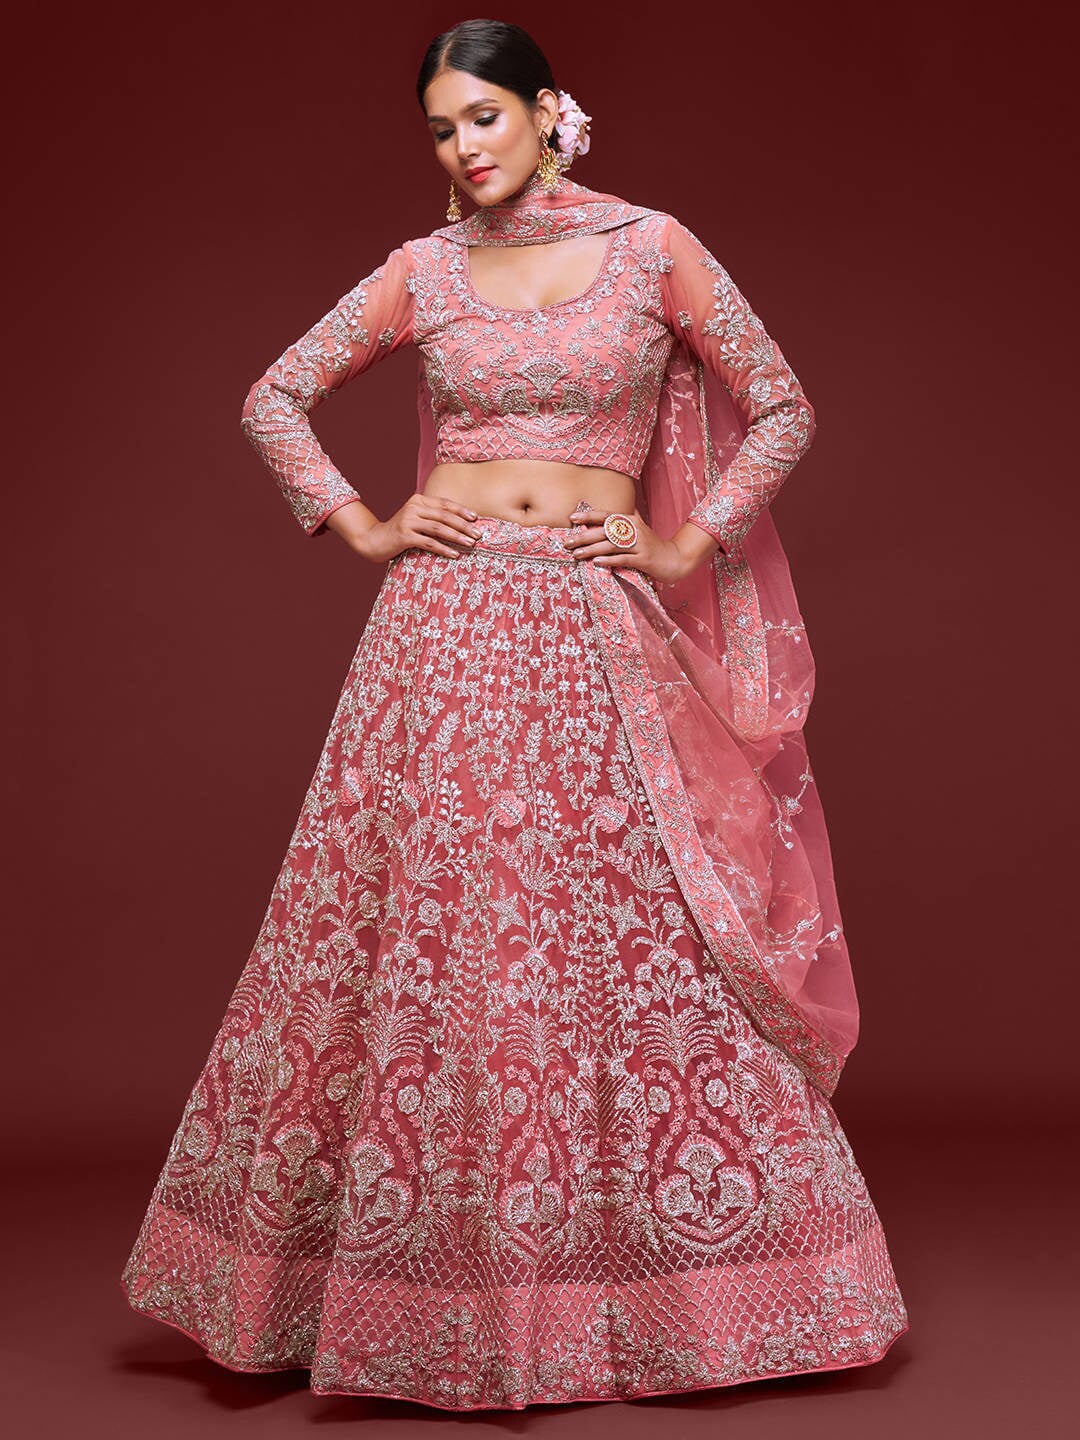 FABPIXEL Women Coral & Silver Embroidered Semi-Stitched Lehenga Choli Set Price in India